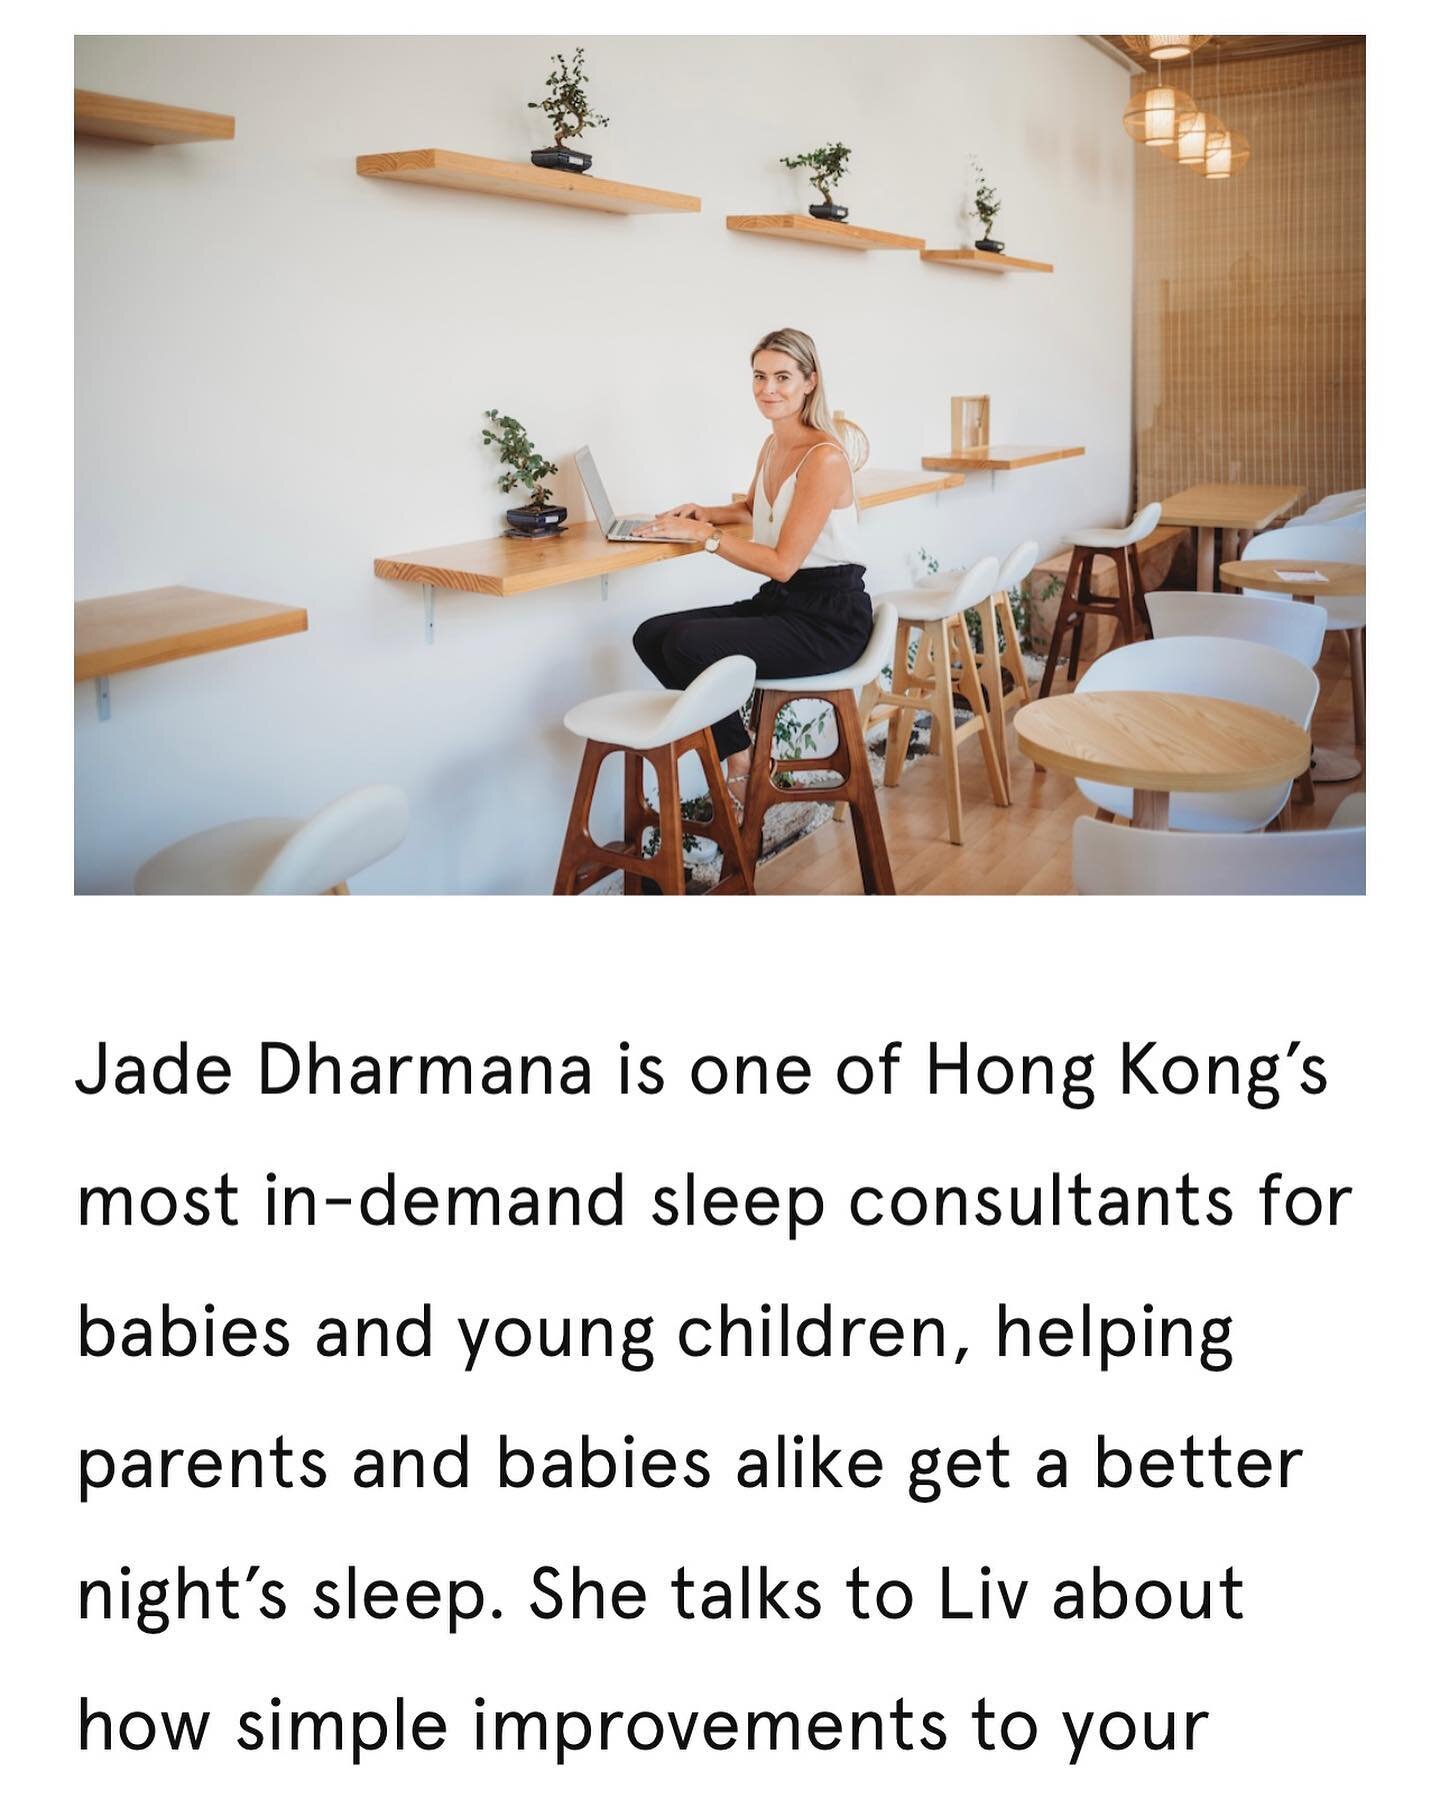 FEATURED INTERVIEW WITH LIV MAGAZINE
@liv.magazine 

The full interview can be read by copying this link:

https://liv-magazine.com/women-of-wellness-jade-dharmana-the-holistic-sleep-edit/

#interview #livmagazine #sleep #coach #featured #babysleep